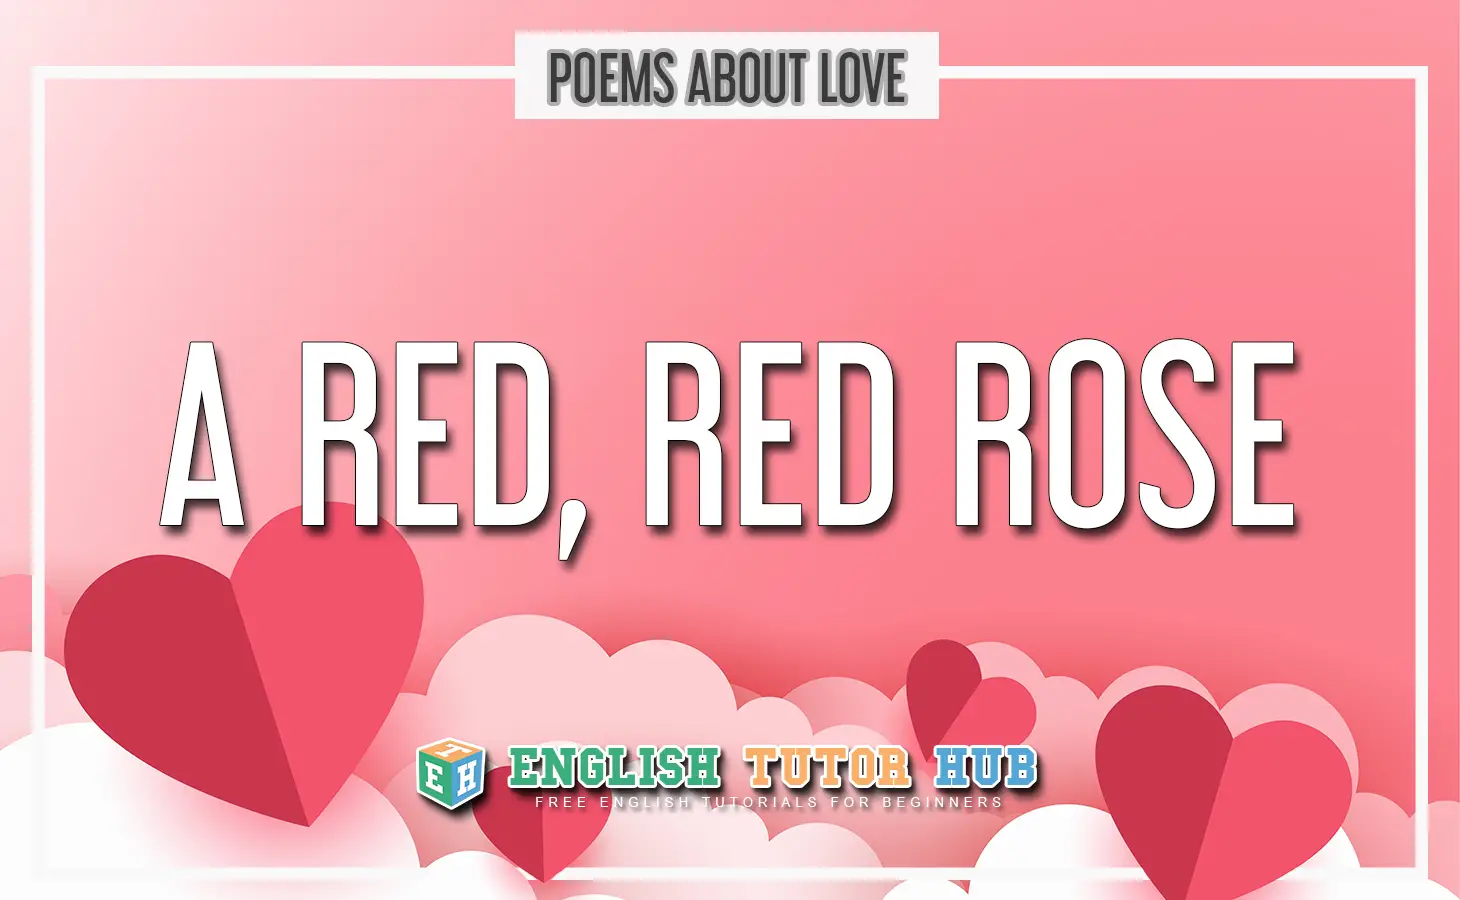 A Red, Red Rose by Robert Burns - Summary and Lesson [2022]